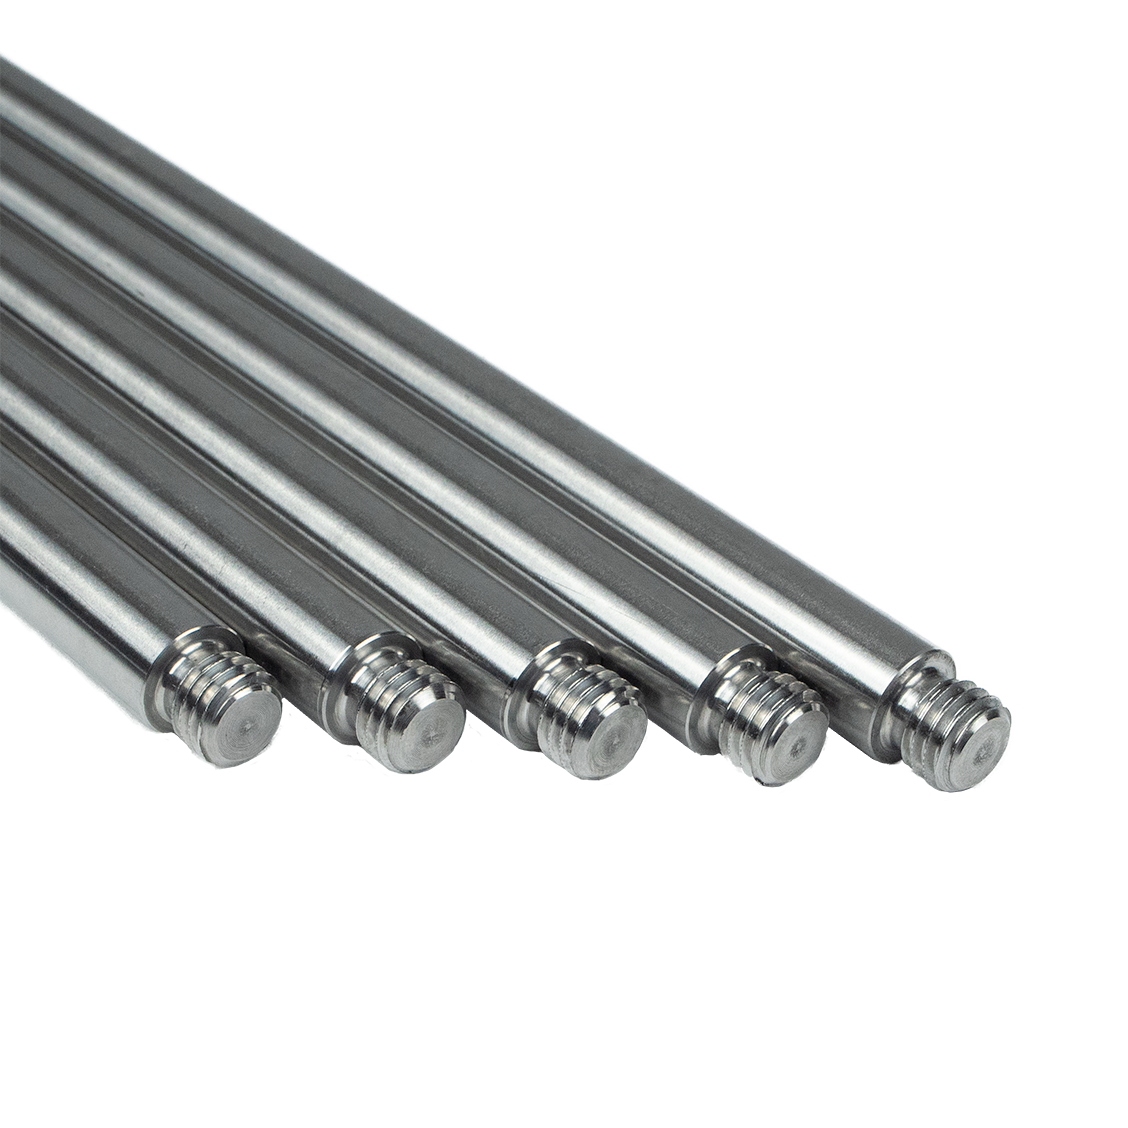 Threaded Stand Rod M10 - Ø 15 mm, length 1000 mm - stainless steel